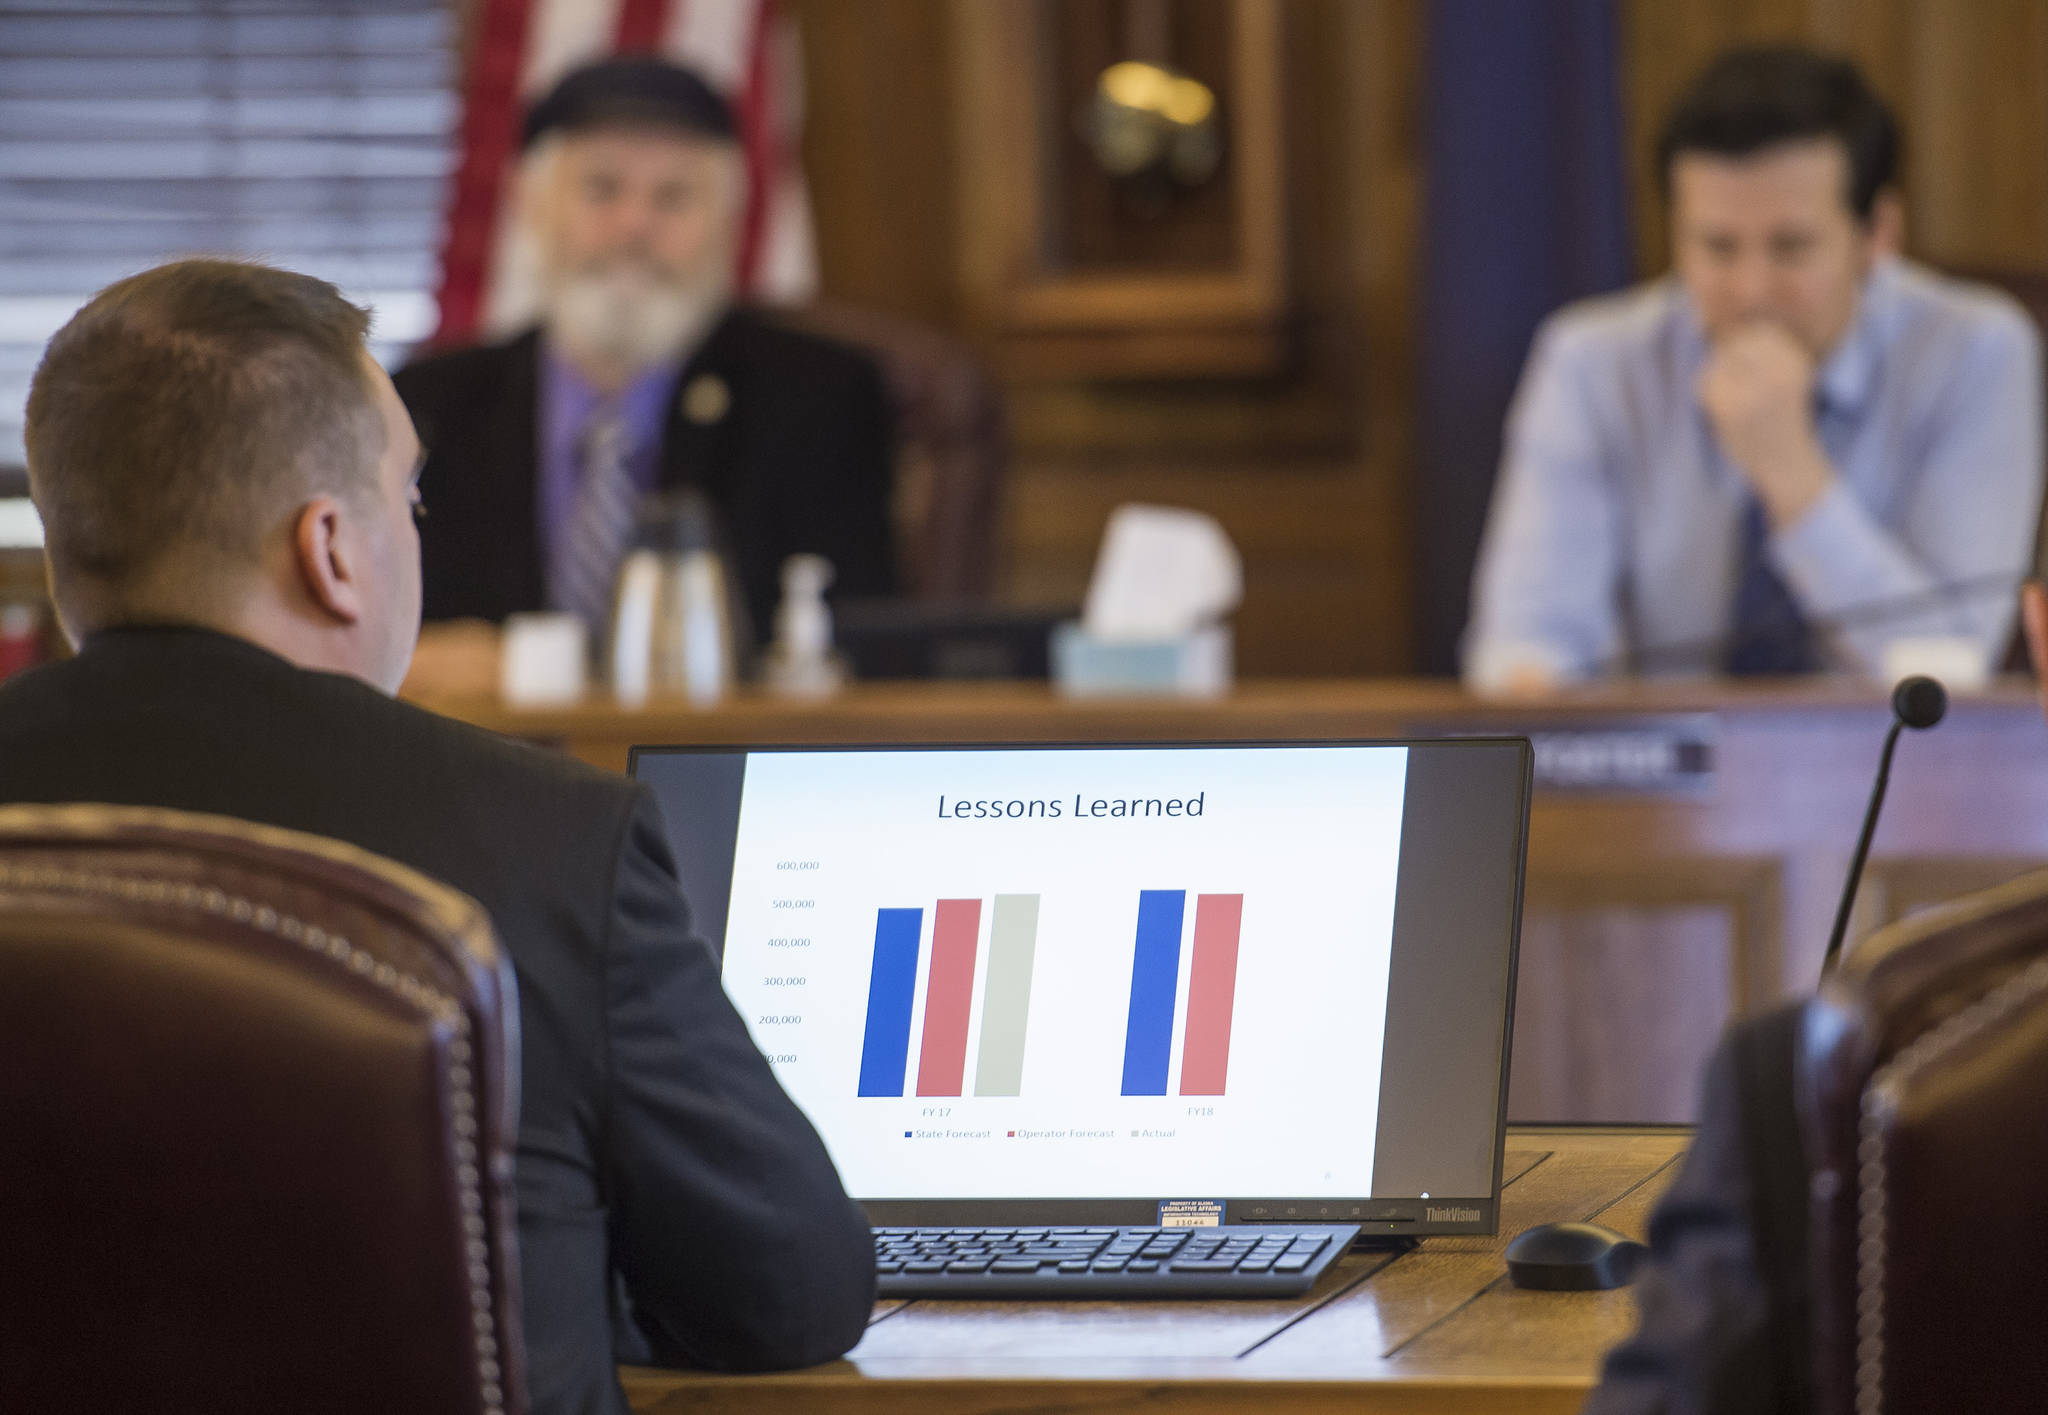 House Finance Committee members listen as Ed King, Legislative Liaison for the Department of Natural Resources, give the Preliminary 2017 Fall Production Forecast at the Capitol on Wednesday, Oct. 25, 2017. (Michael Penn | Juneau Empire)